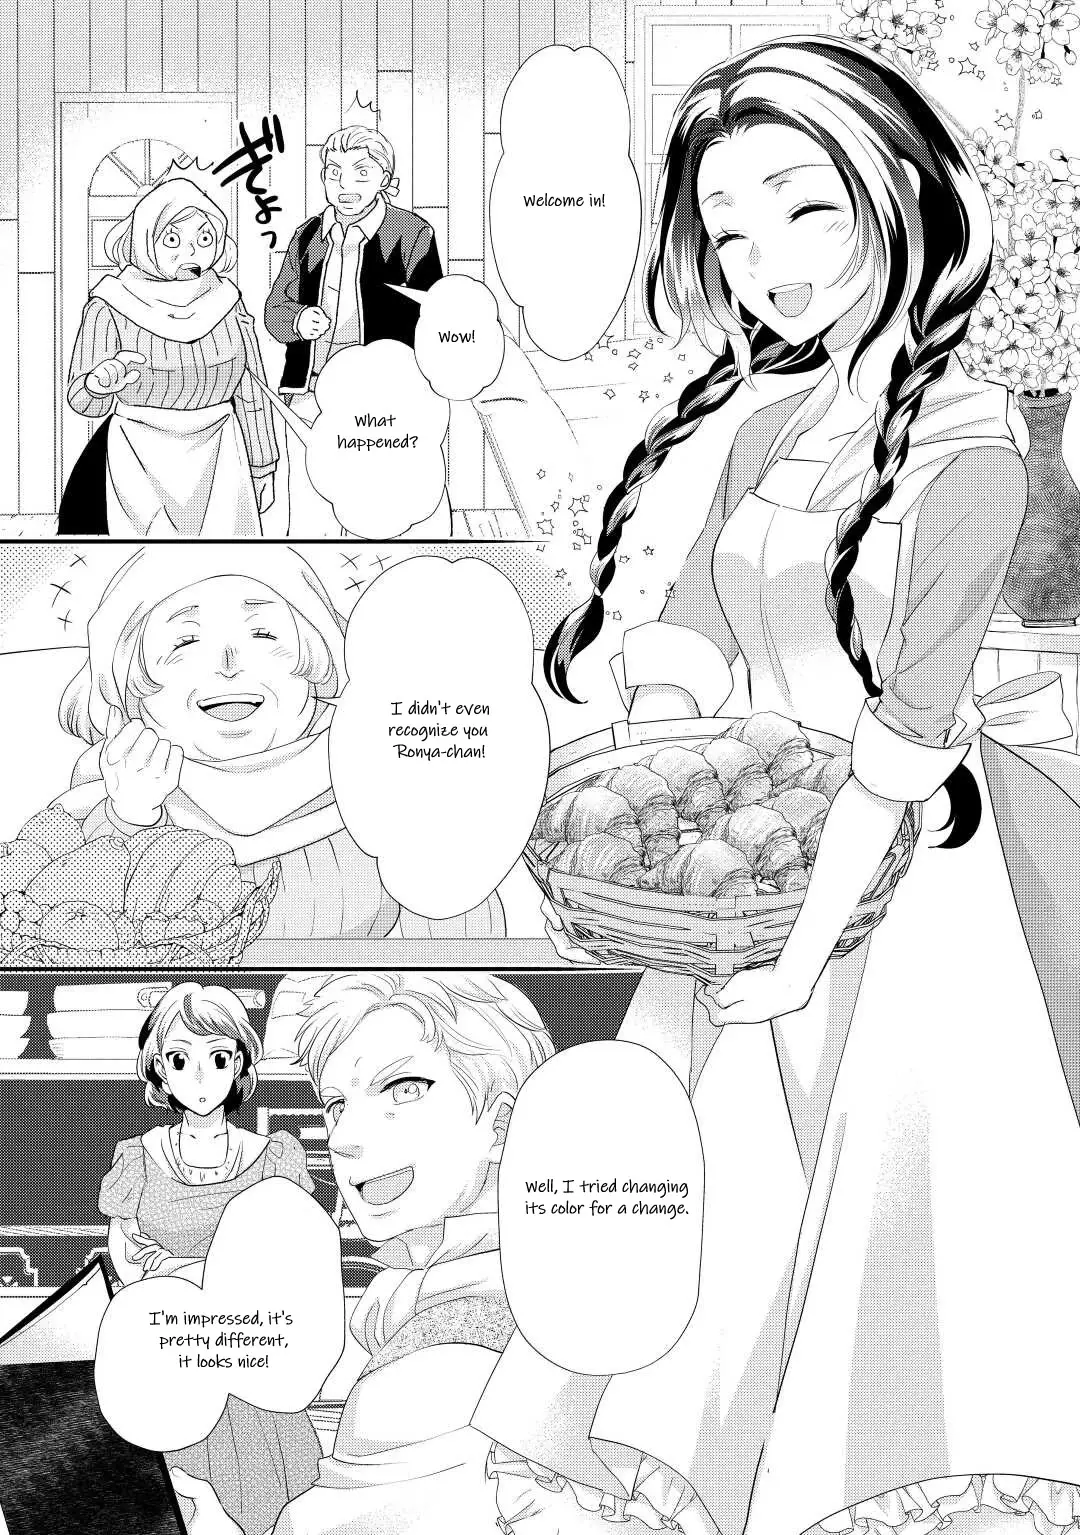 Milady Just Wants to Relax - 34 page 20-6d94ace5